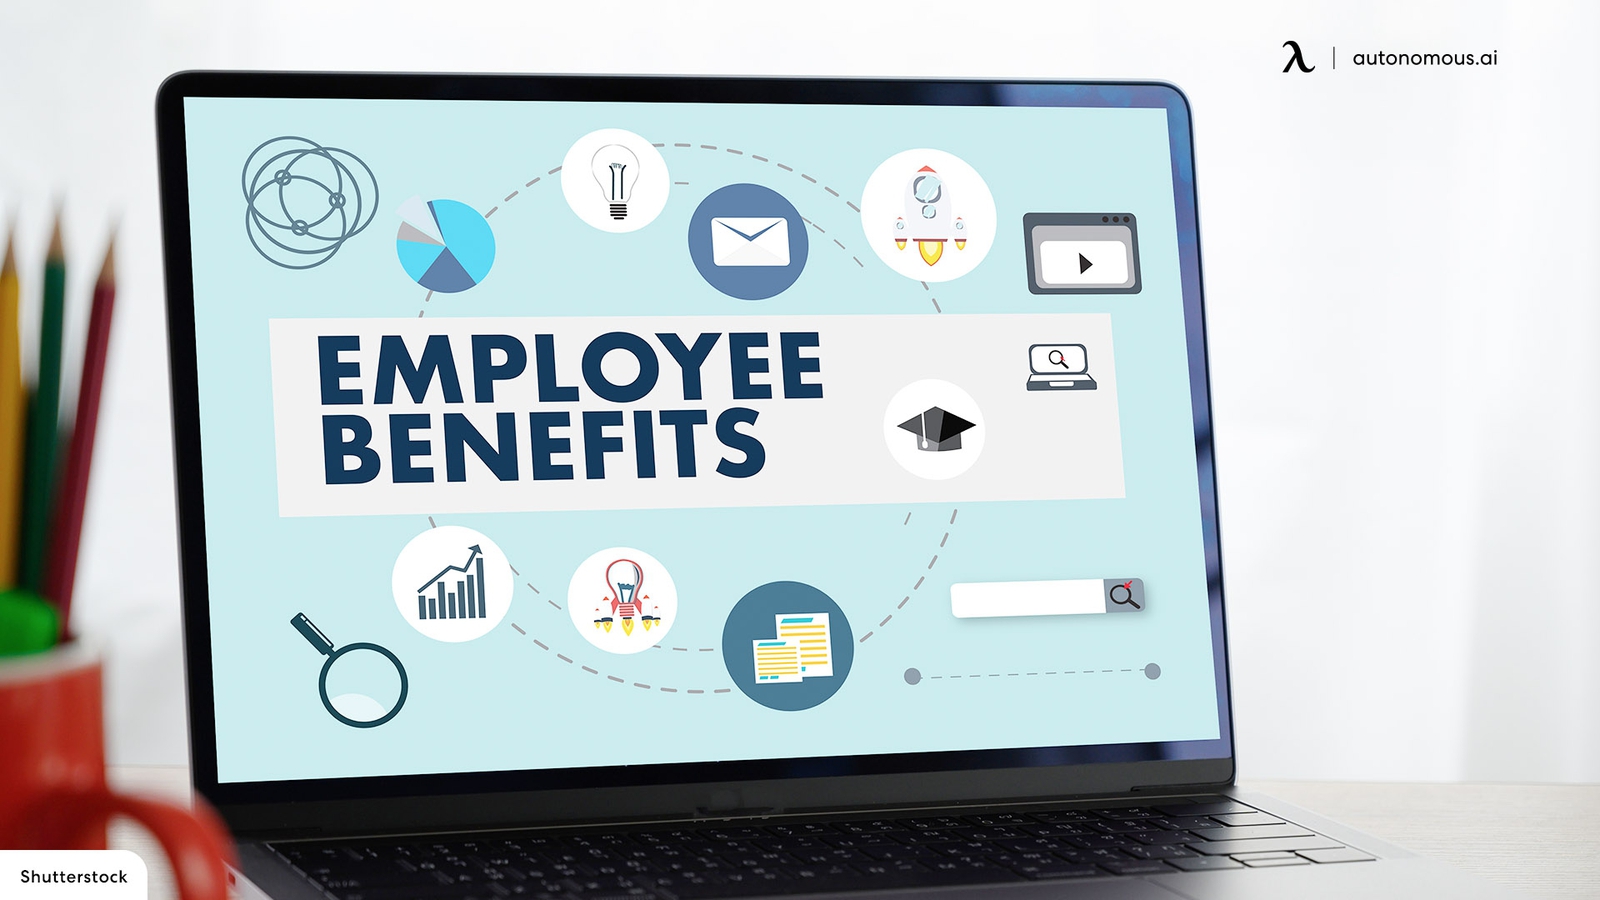 How to Build a Competitive Employee Benefit Package?